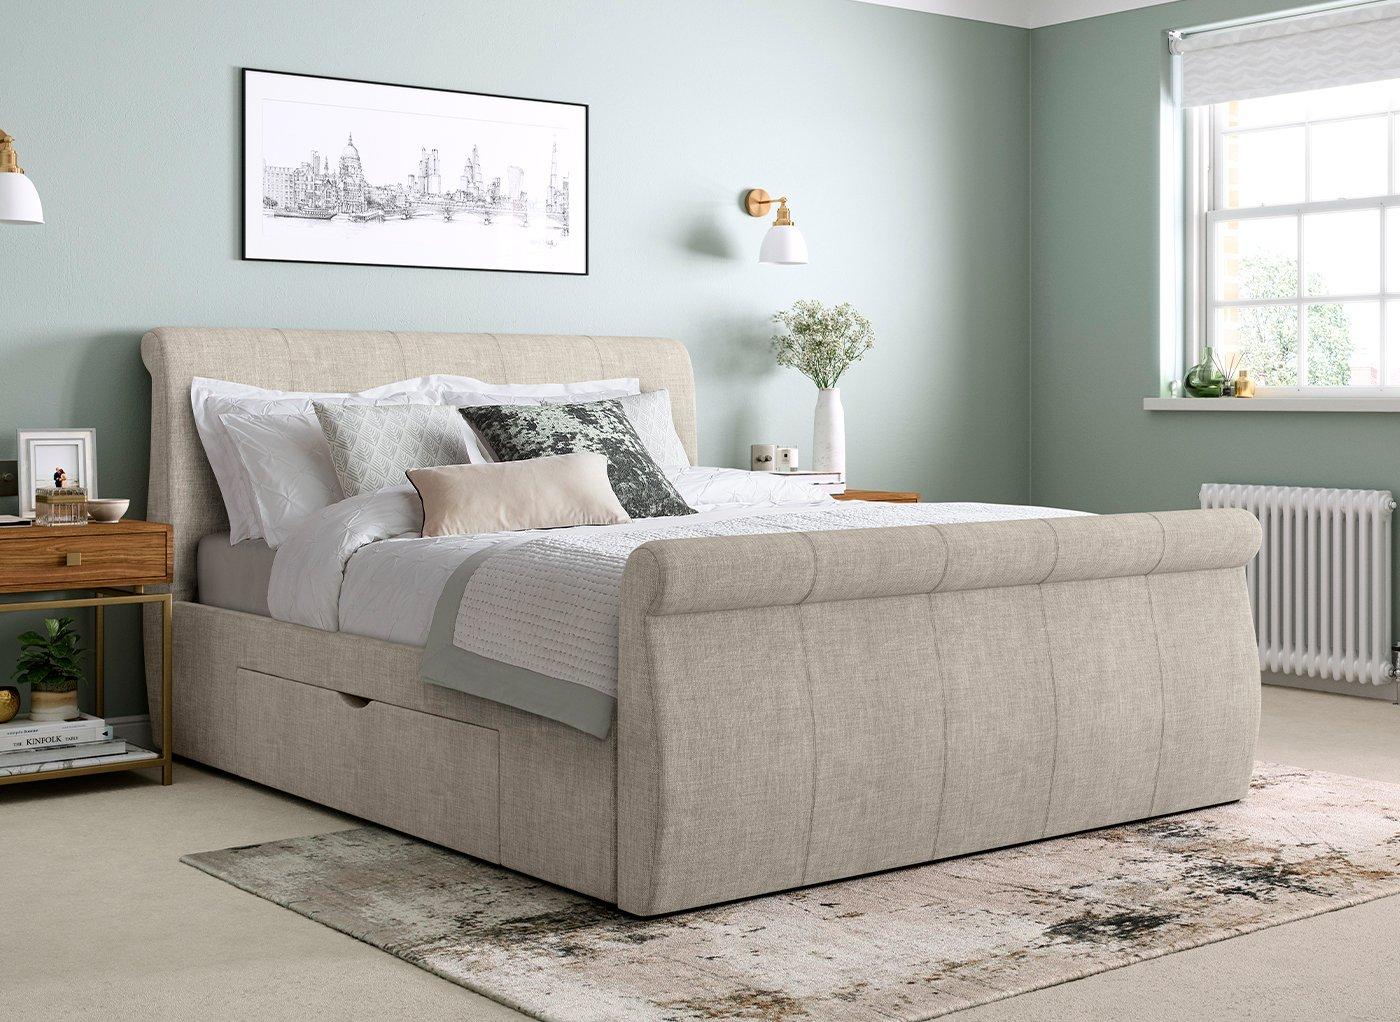 Sale Save Today On Cheap Beds Online Or In Store Dreams